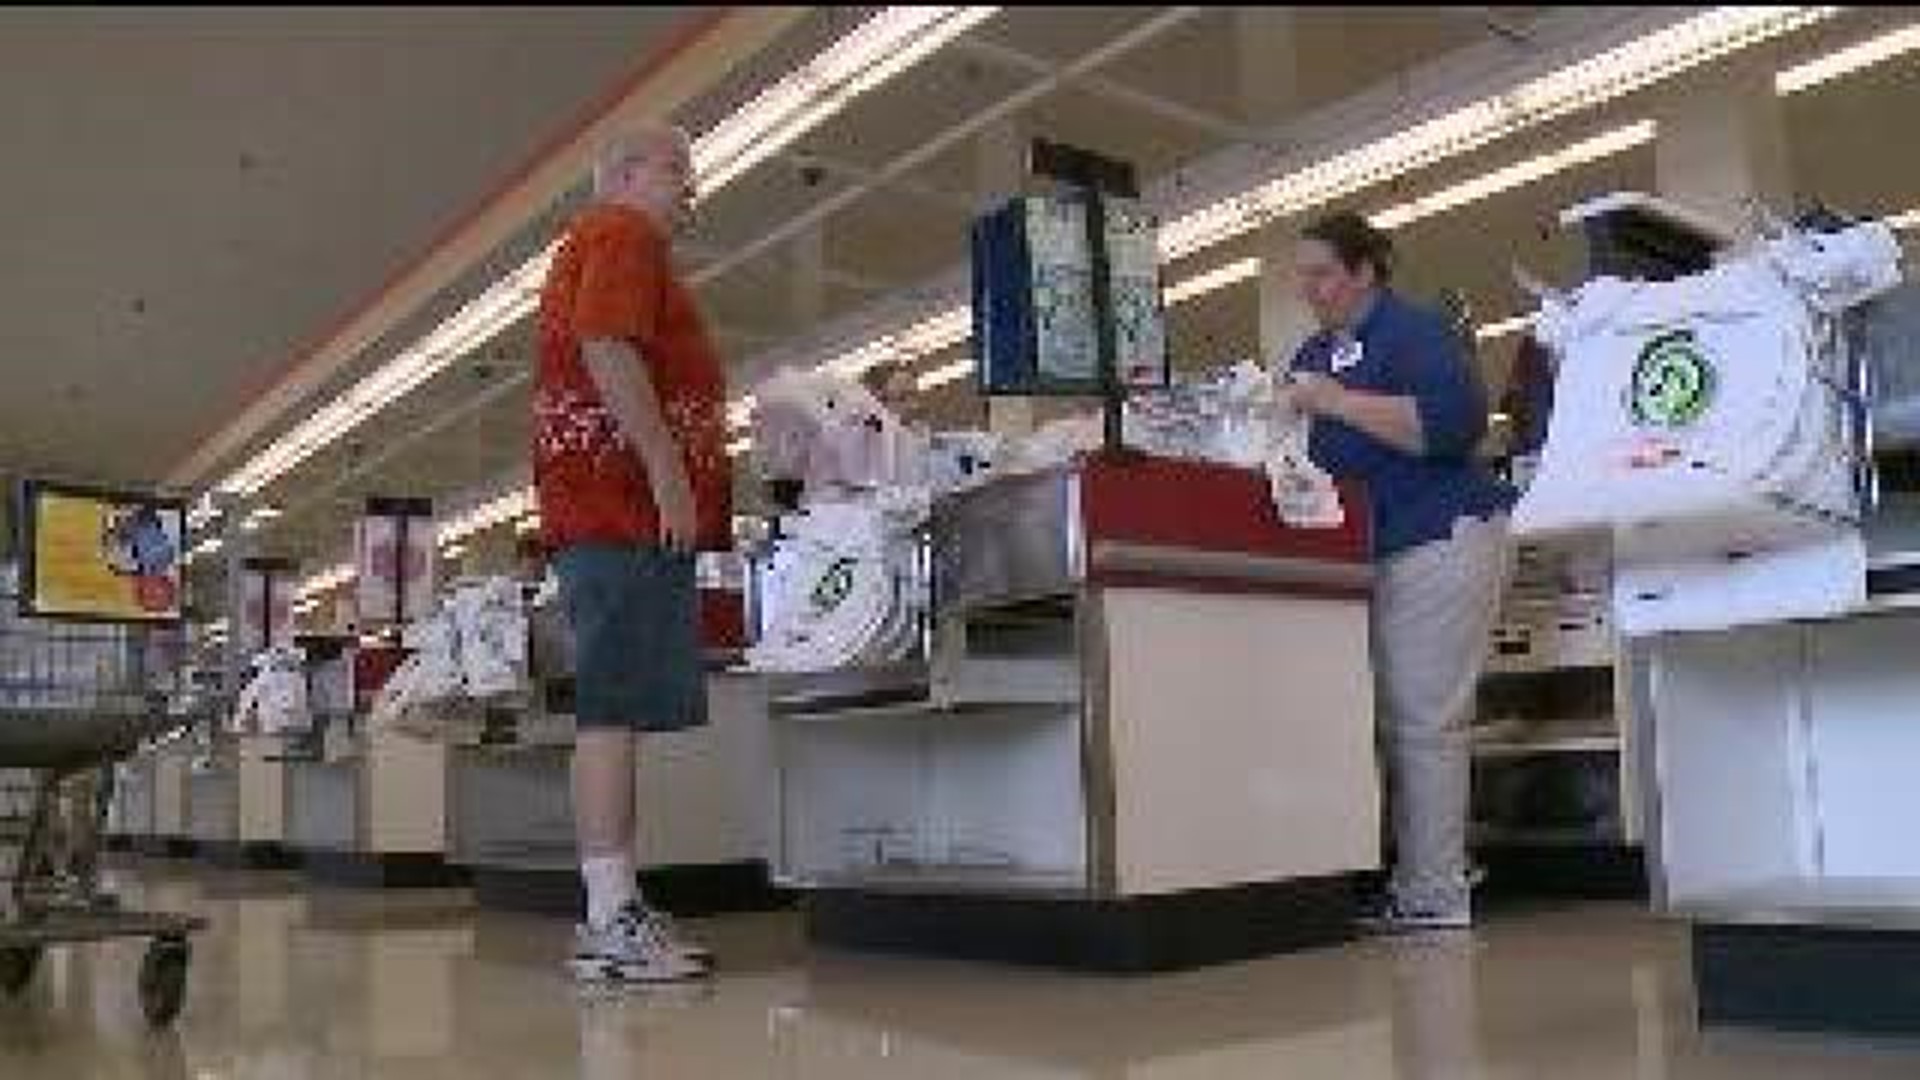 Payment Processing Errors at Weis Markets